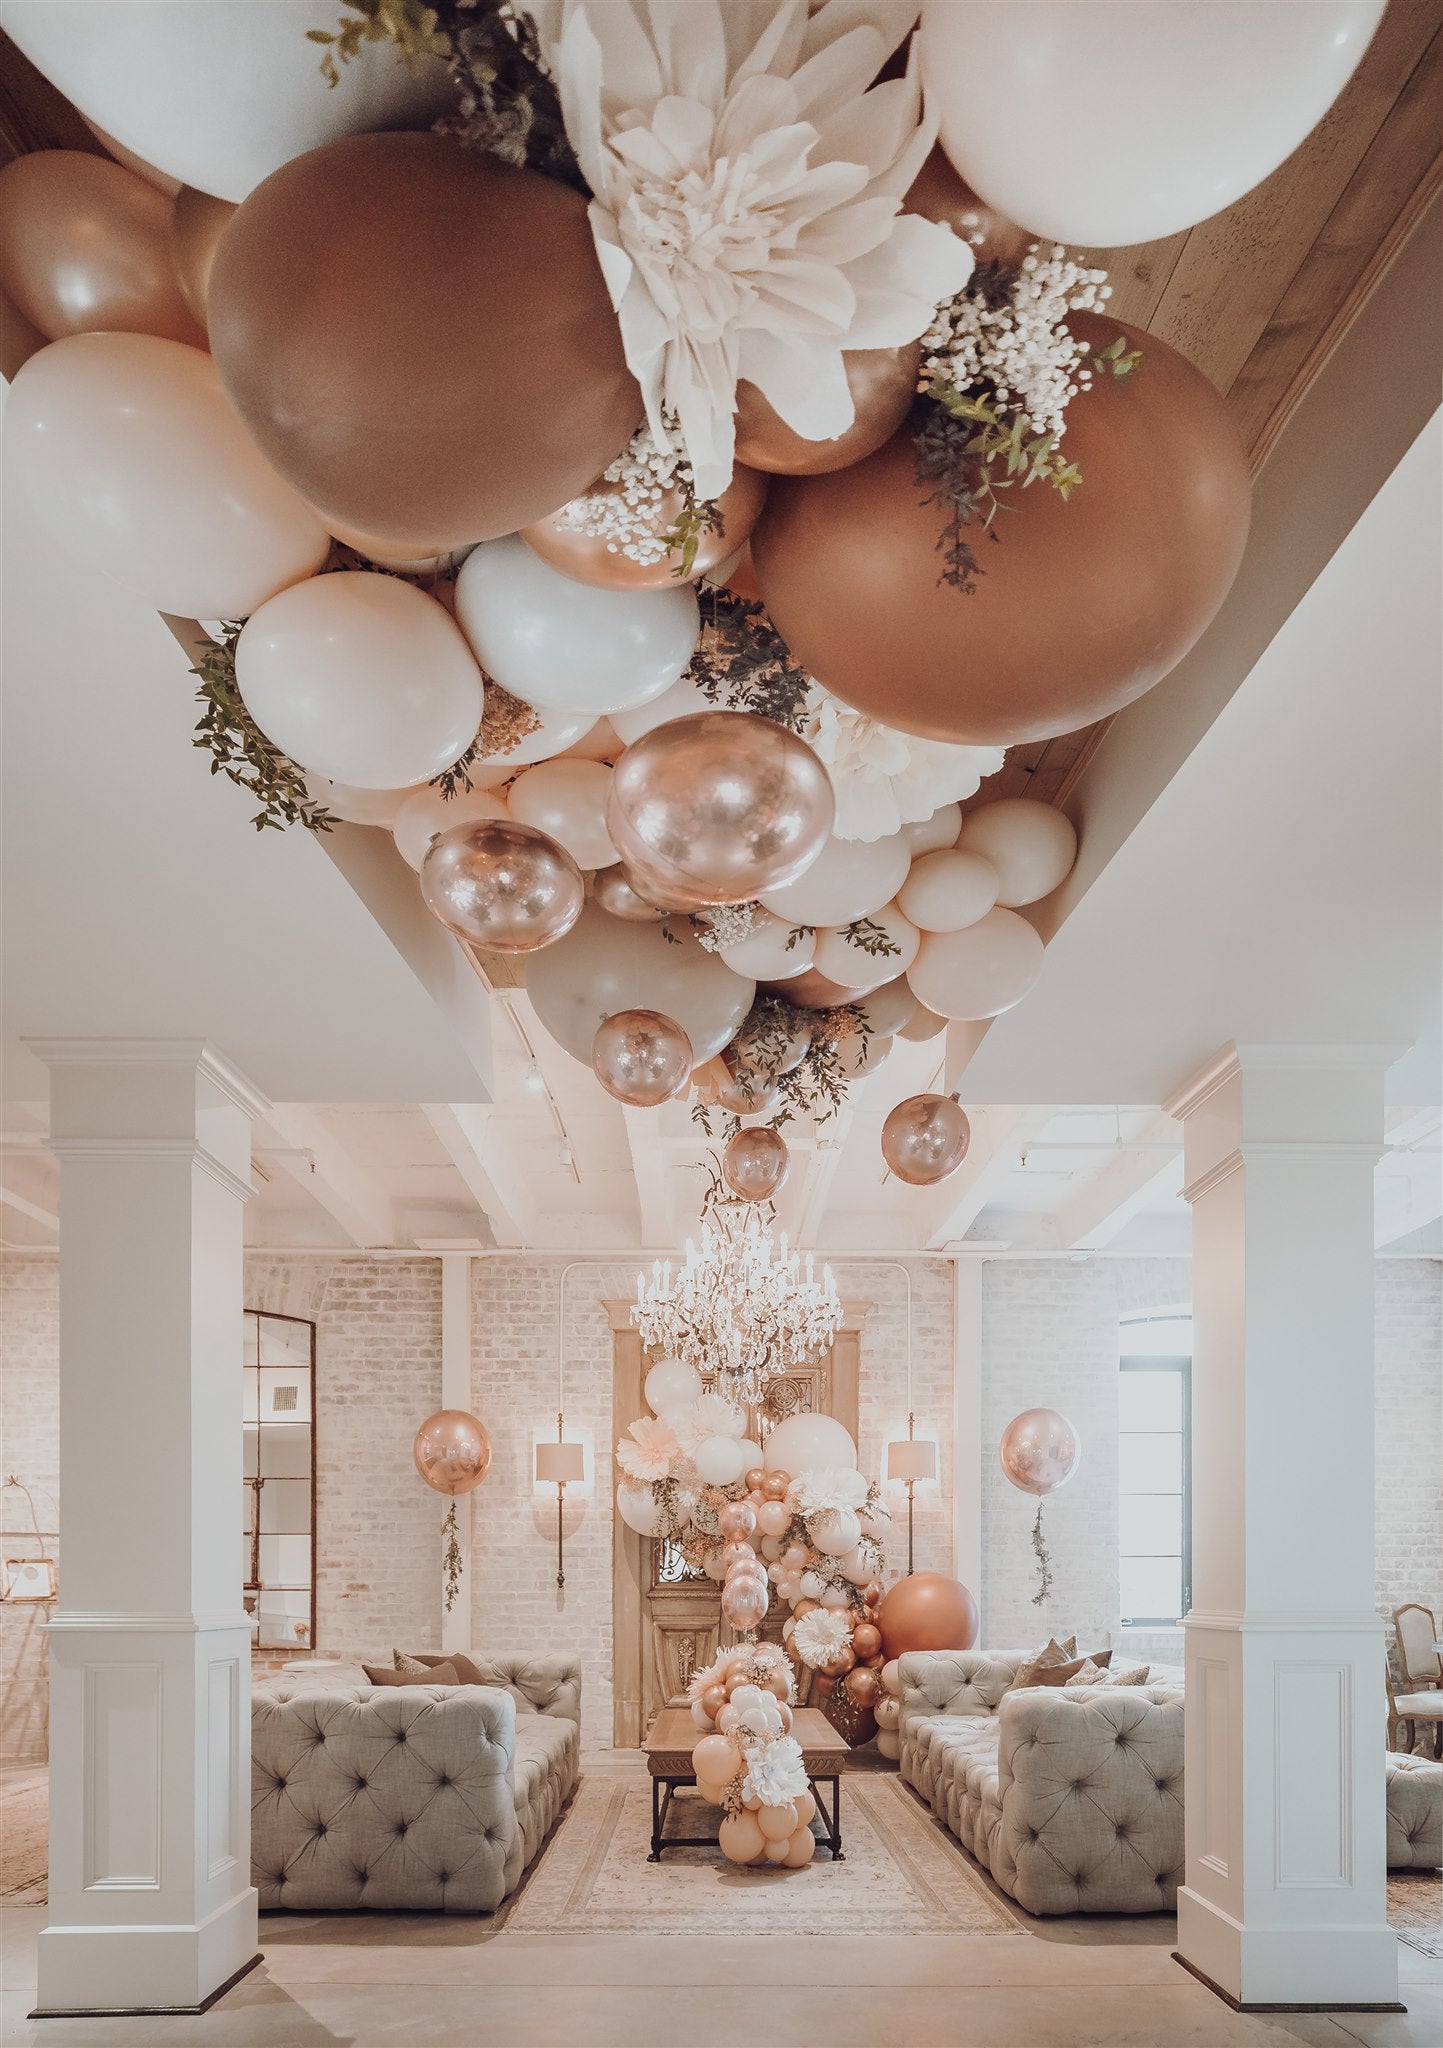 Romantic blush balloons with floral houston, tx Revelry Goods